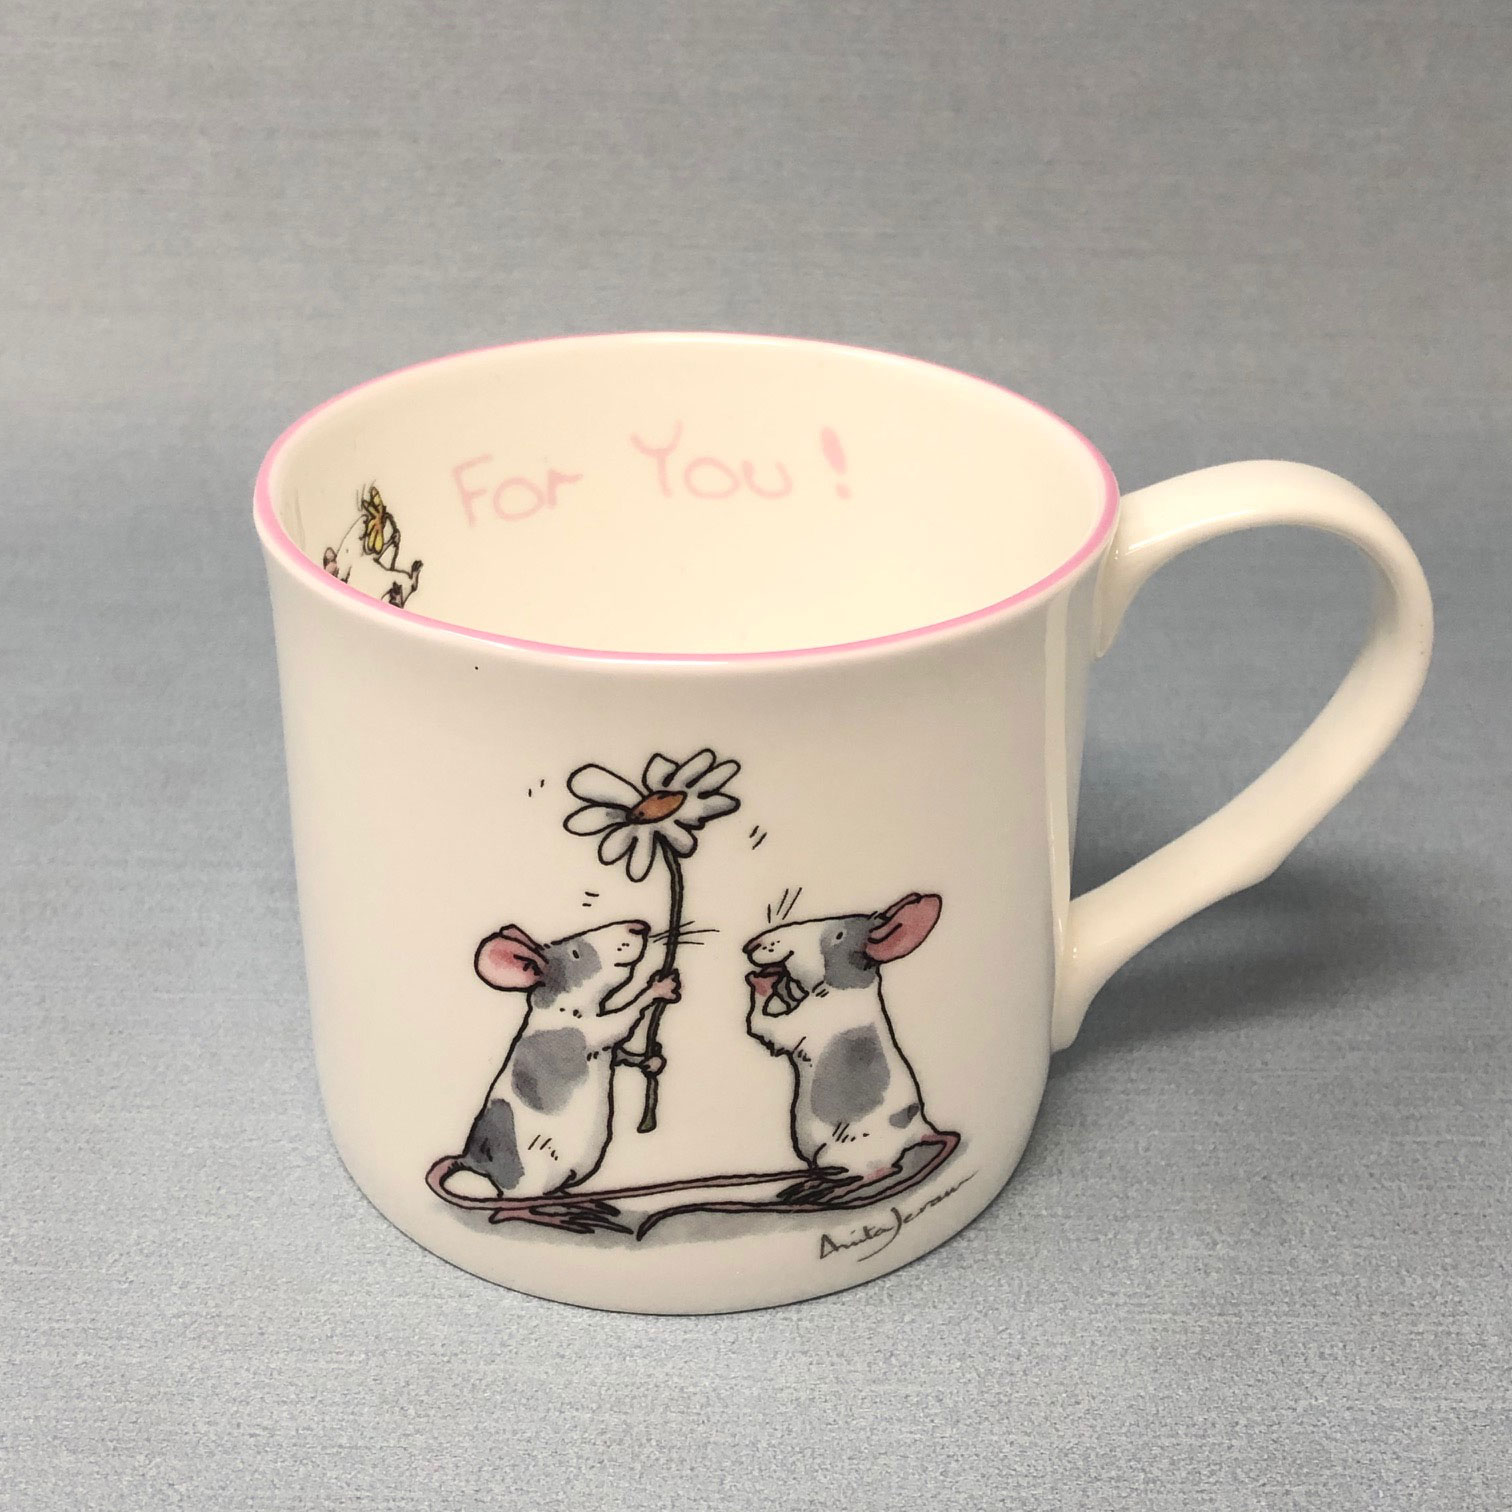 Two Bad Mice Becher med "For You", 300 ml by Anita Jeram